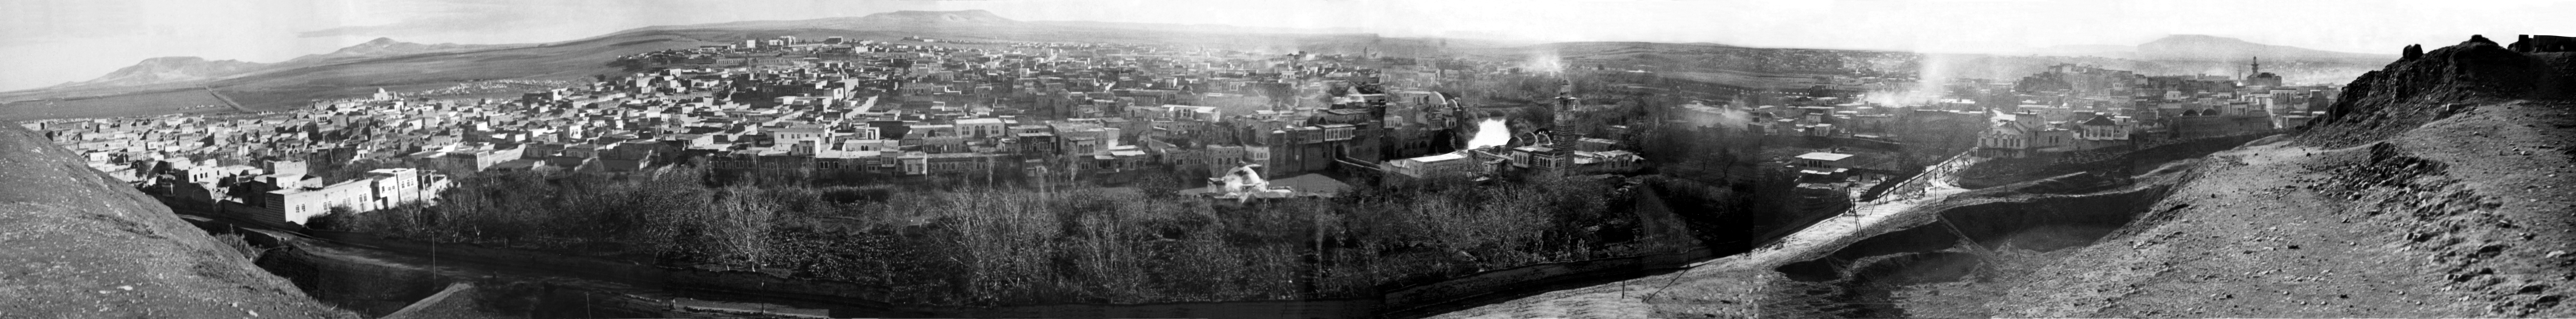  Hama - <p><strong>Hama, view from Hama's Citadel towards Al-Kilaniyya Quarter</strong></p><p>Taken from Hama's citadel, this view showcases the east side of the city and the magnificent Al-Kilaniyya quarter, which was demolished in 1981-82.</p>